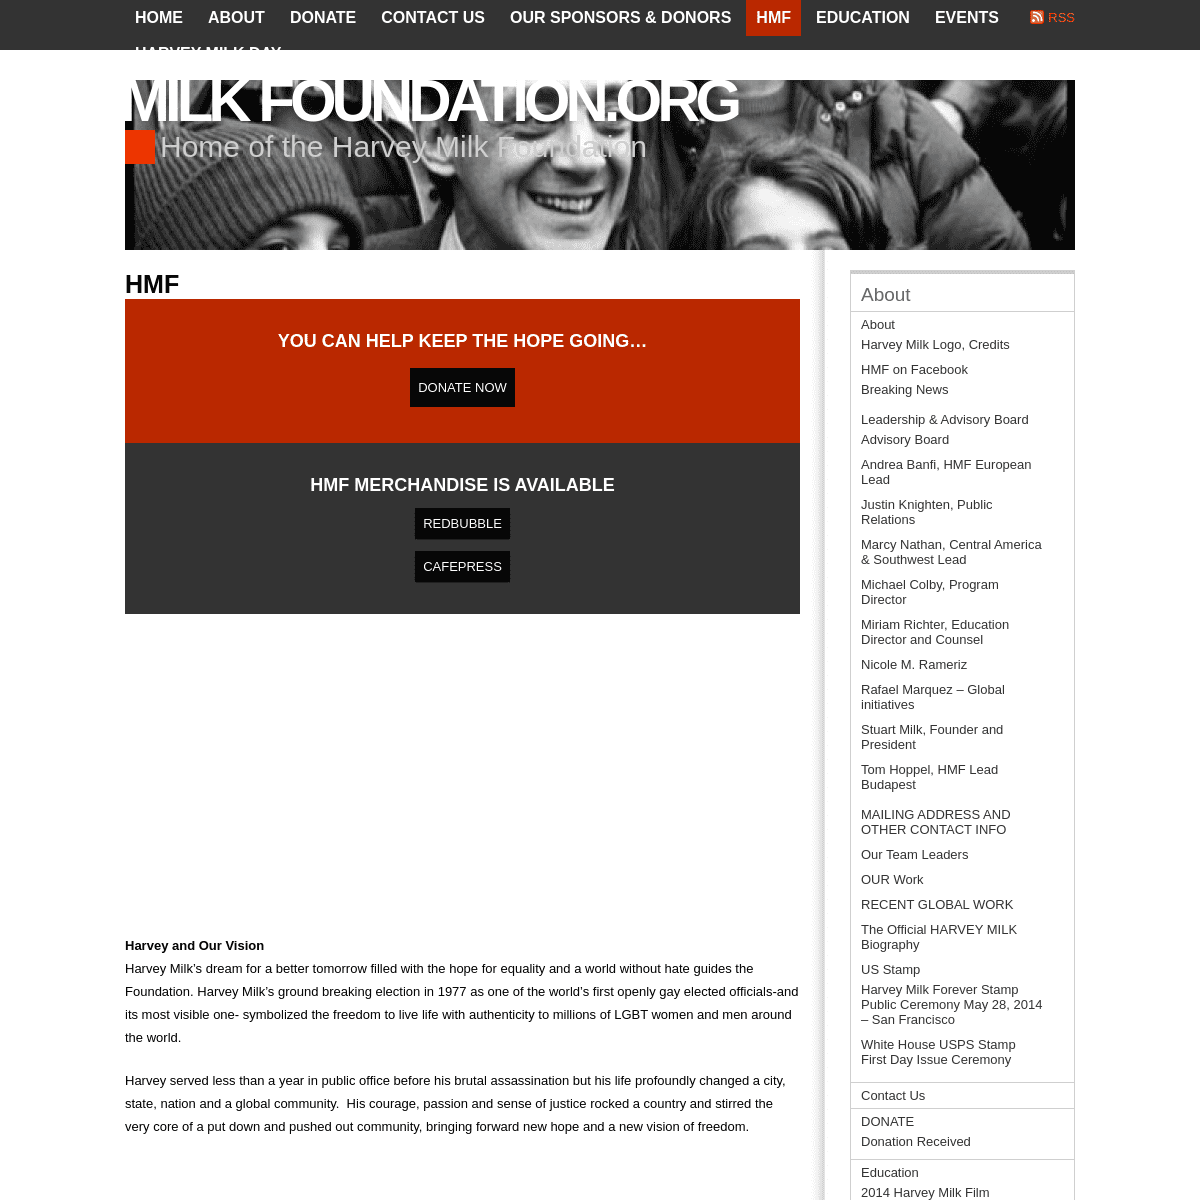 A complete backup of https://milkfoundation.org